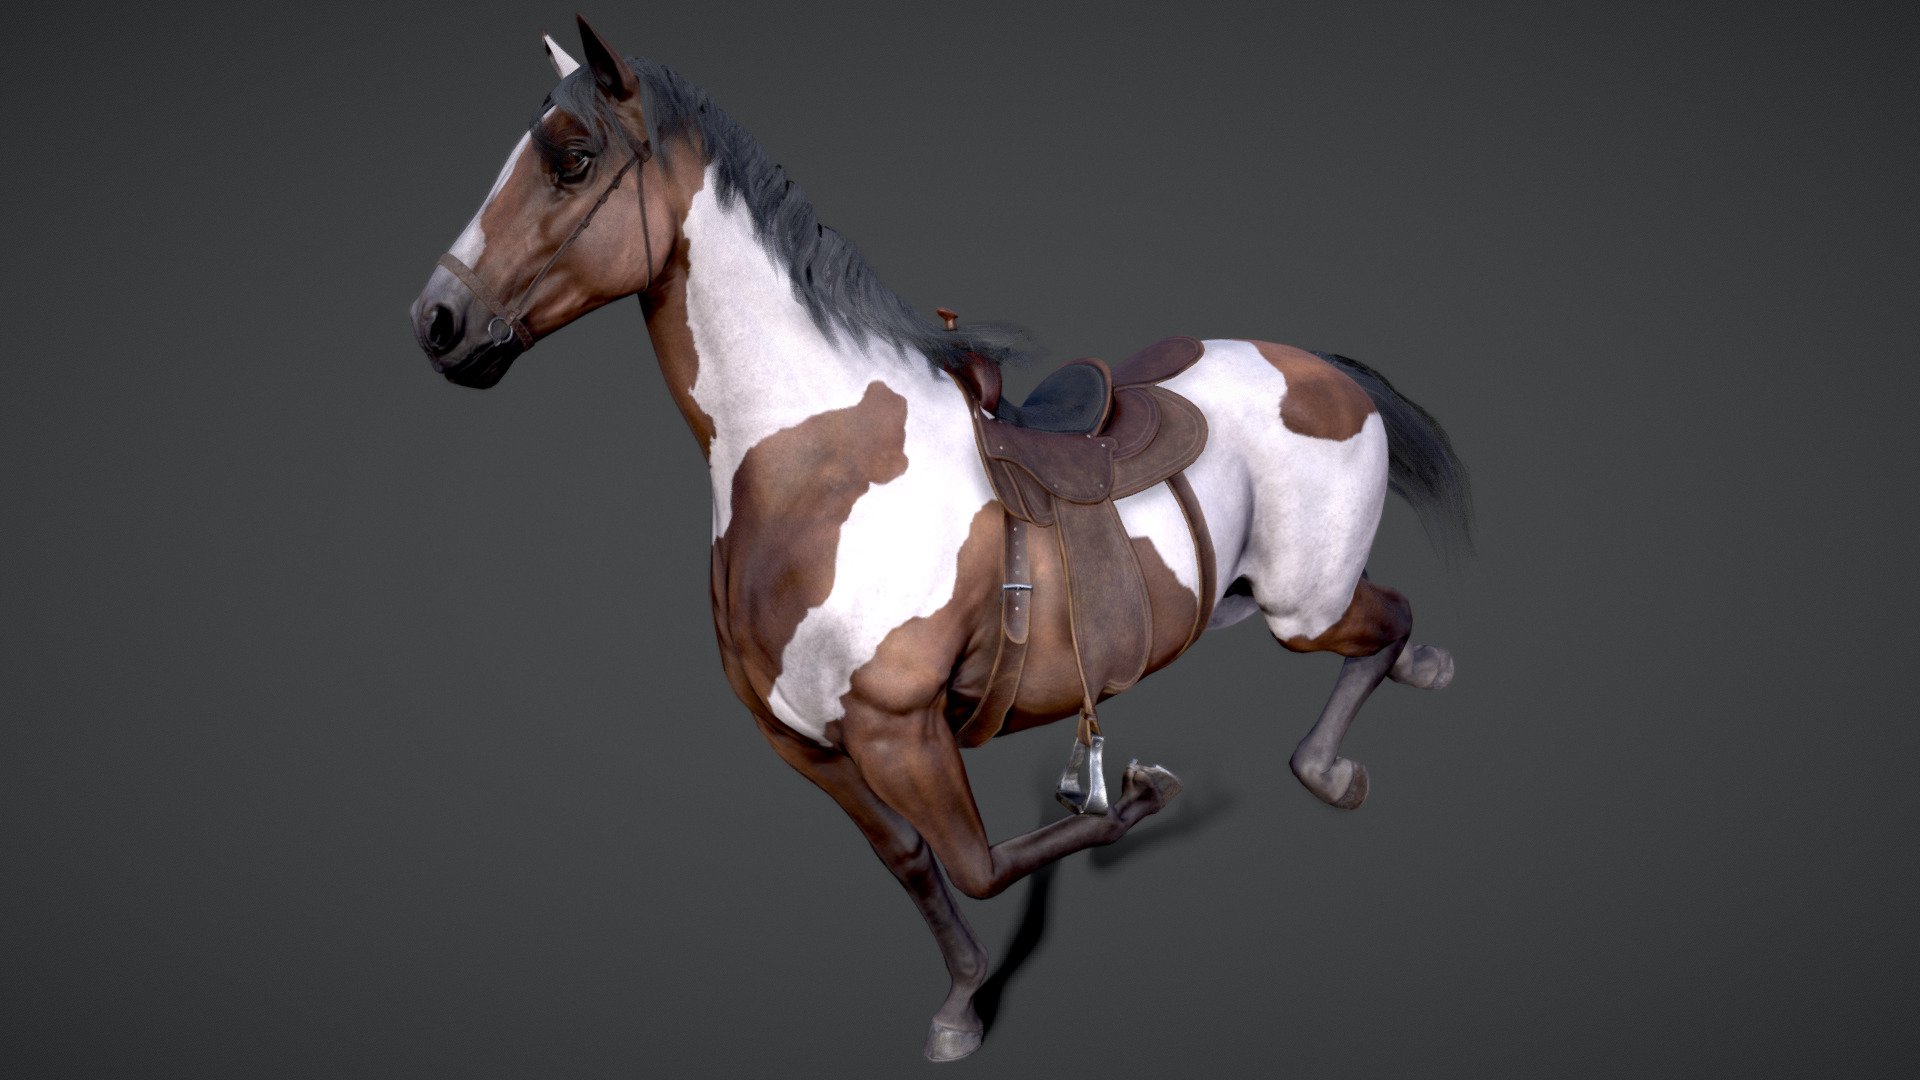 Youtube Link

Files: Unity(2018.4), Unreal(4.26), FBX(7.2), Blender(2.92).

Number of characters: 1

Number of skins: 10(Horse), 2(Saddle)


Materials(Unity): HDRP(Metallic) / Standard(metallic)

Number of Materials: 18

Textures: Albedo, Normals, MADS(Metallic, AO, Details, Gloss).

Texture Resolutions: x128/x512/x2048/x4096

Number of Textures: 20


Poly-count:

Tris: 19120 - Horse | 7121 - Saddle | 3580 - Bridle | 944 - Horseshoes

UV mapping: Non-Overlapping


Rigged: Yes

Animated: Yes

Number of Animations:29

Included animation: Arise, Attack(2), Buck(3), Death, Eat, Sleep, Idle(4), Swim(F, L, R), Fallen, Falling, Gallop(F, L, R), Jump, Jump Land, Jump Run, Run Stop, Small Jump, Walk(F, L, R)
 - Horse(Stallion)  |Game Ready| - Buy Royalty Free 3D model by Viverna (@Viverna_362) 3d model